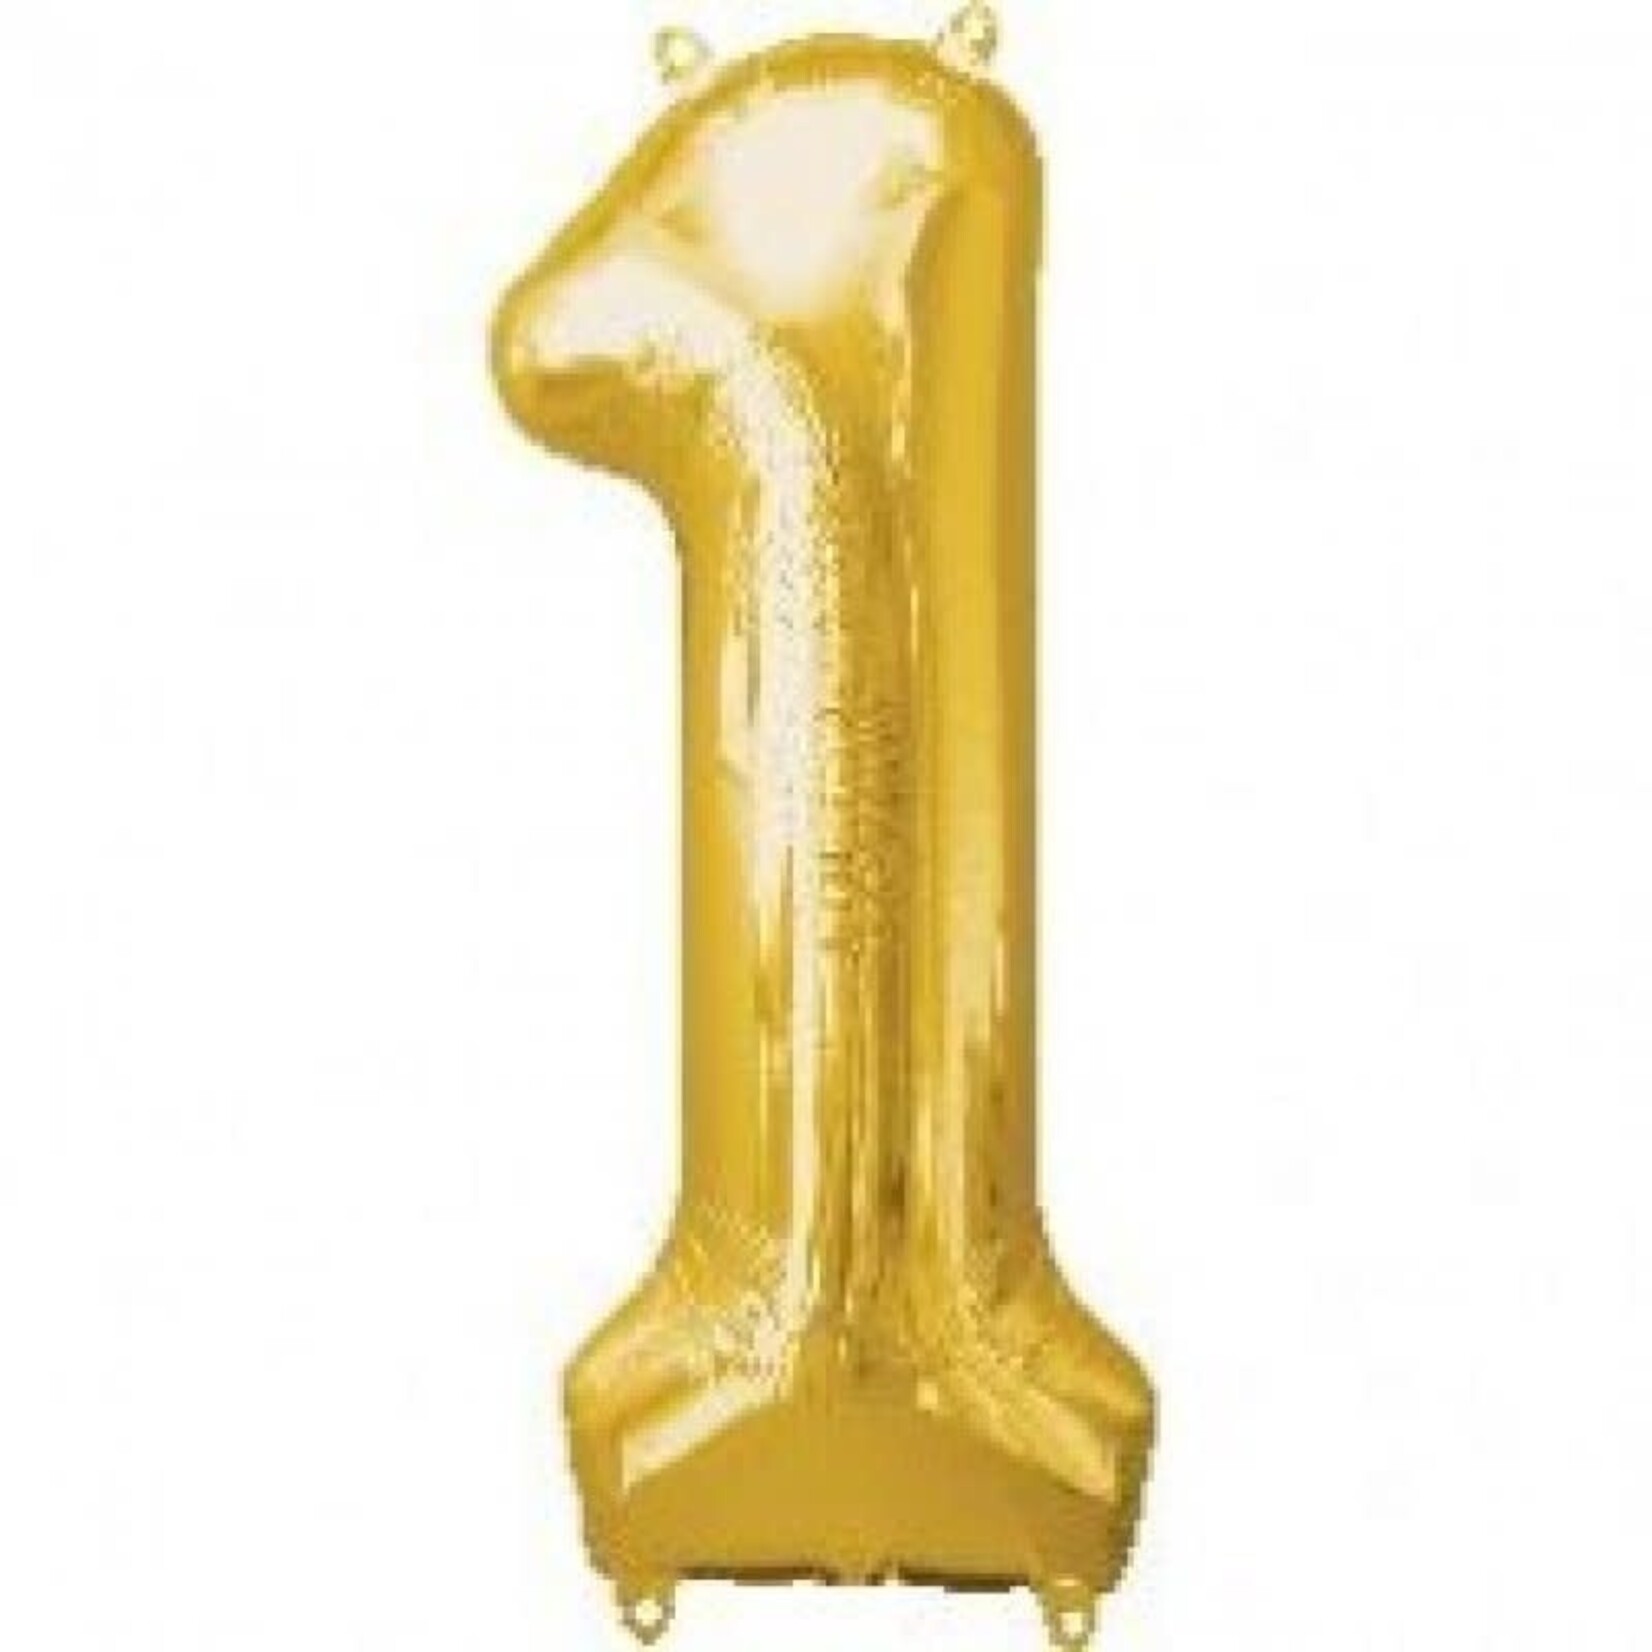 Jumbo Foil Number Balloon 34 Inches